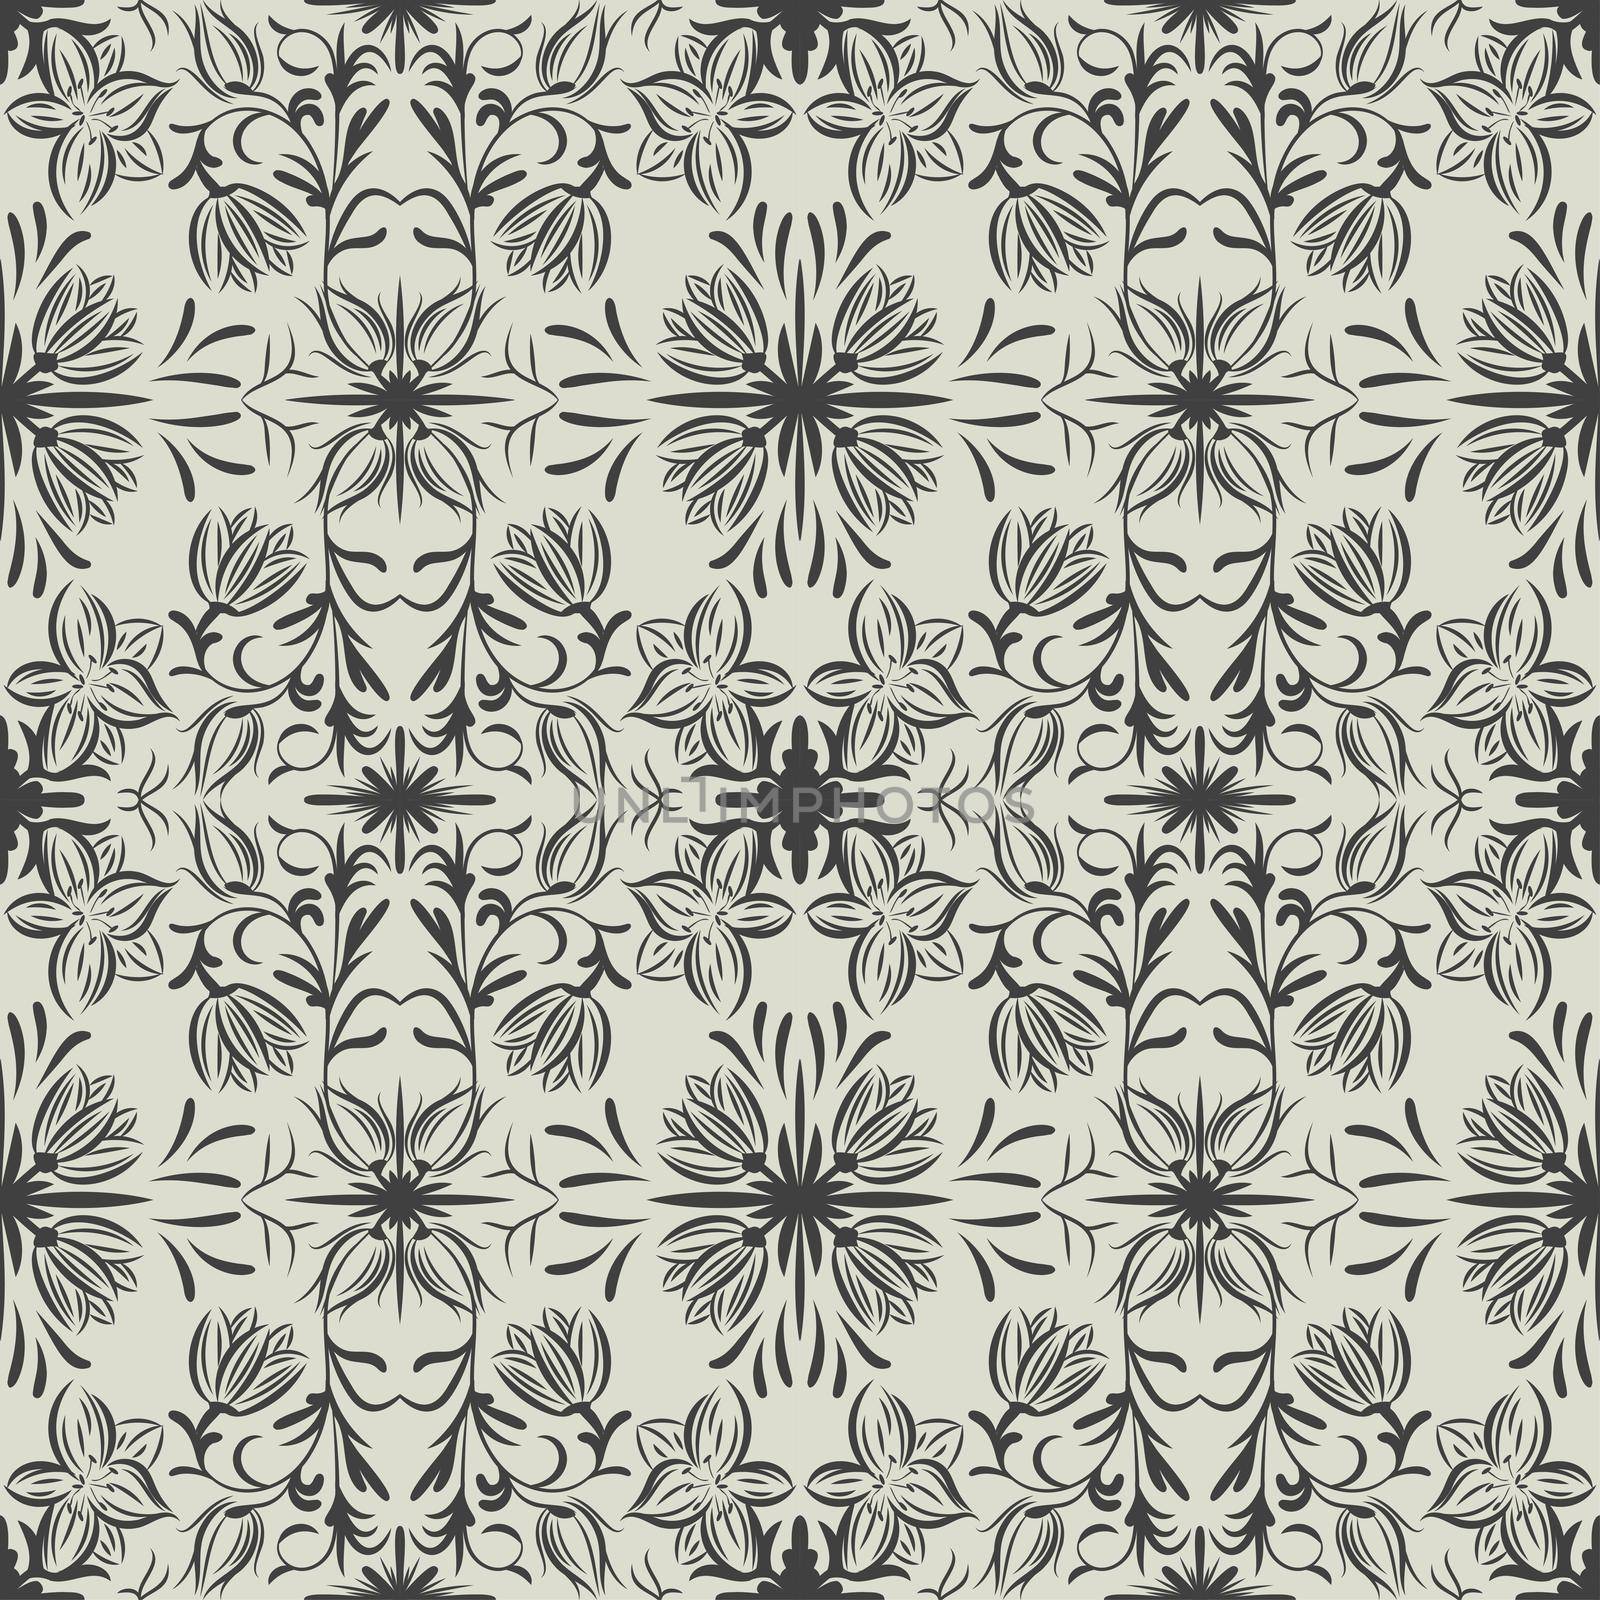 Floral pattern with abstract flowers. Ethnic endless background with ornamental decorative elements with traditional ethnic motives, tribal geometric figures. Print for wrapping, background.  Use for wallpaper, pattern fills, web page background